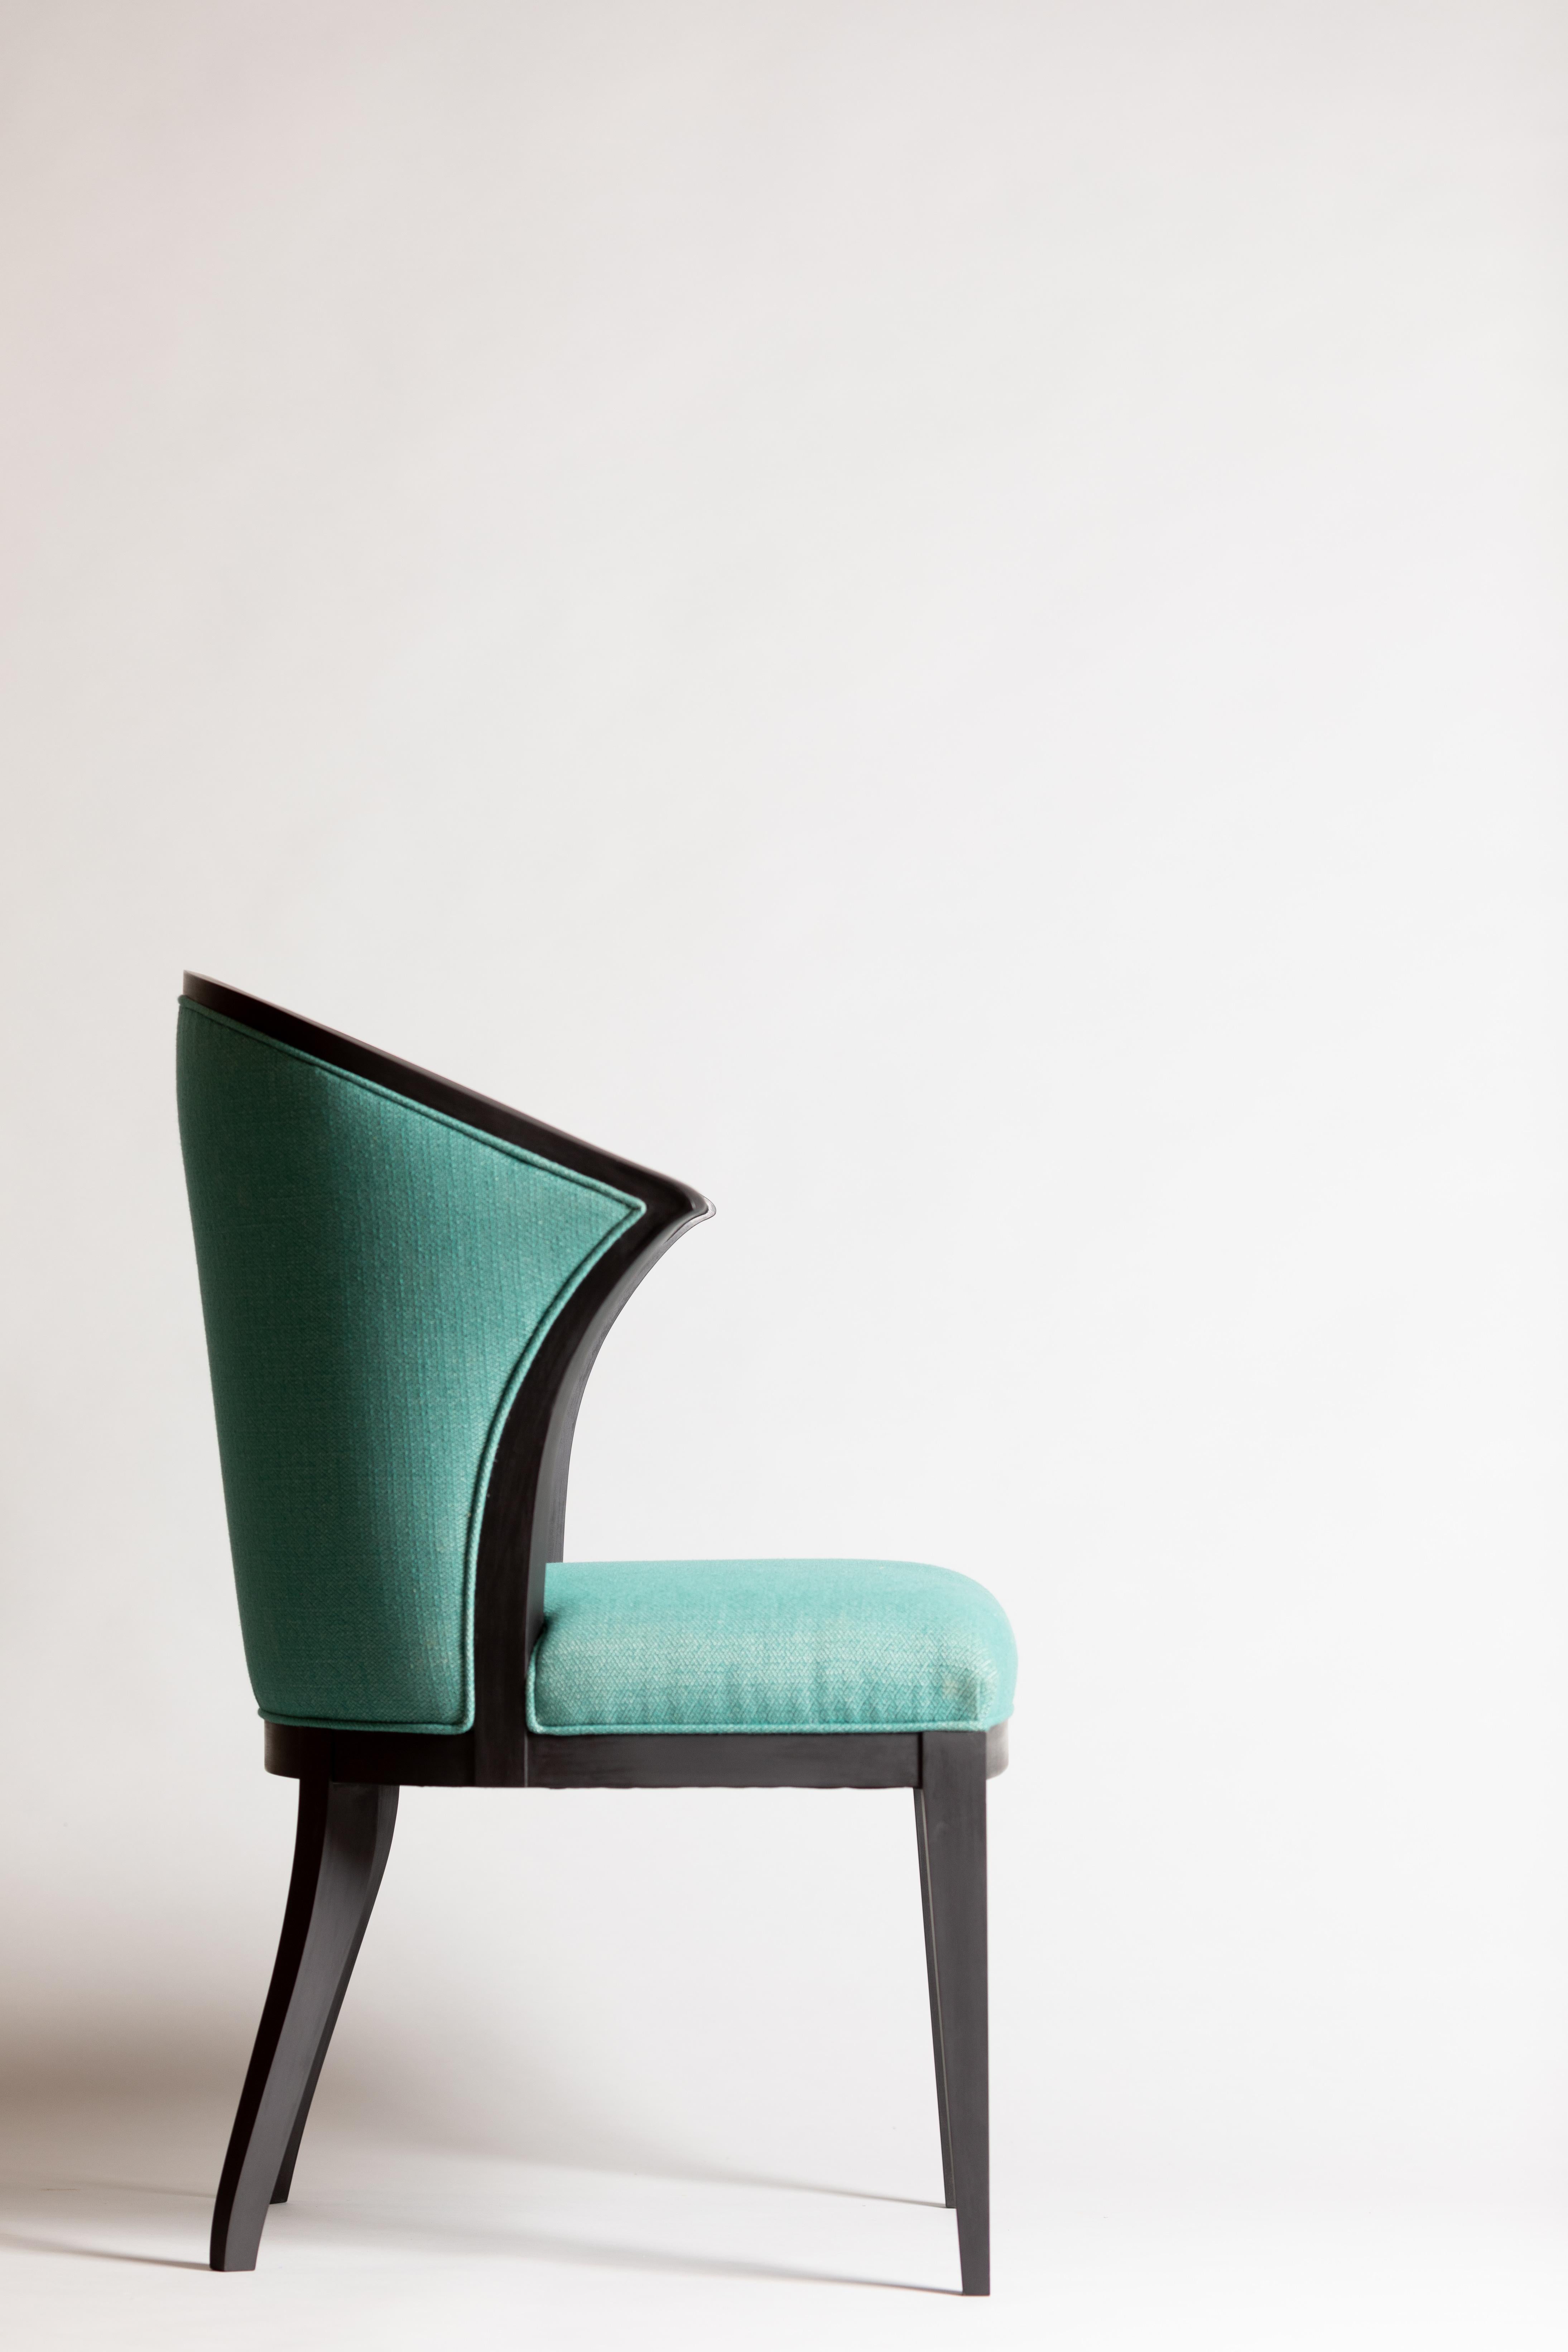 Contemporary with a nod to tradition, this chair is sturdy and Classic. The arms stop before the front of the chair making it comfortable enough to be part of a living room yet also practical as a desk chair. Painted using non-toxic milk paint.